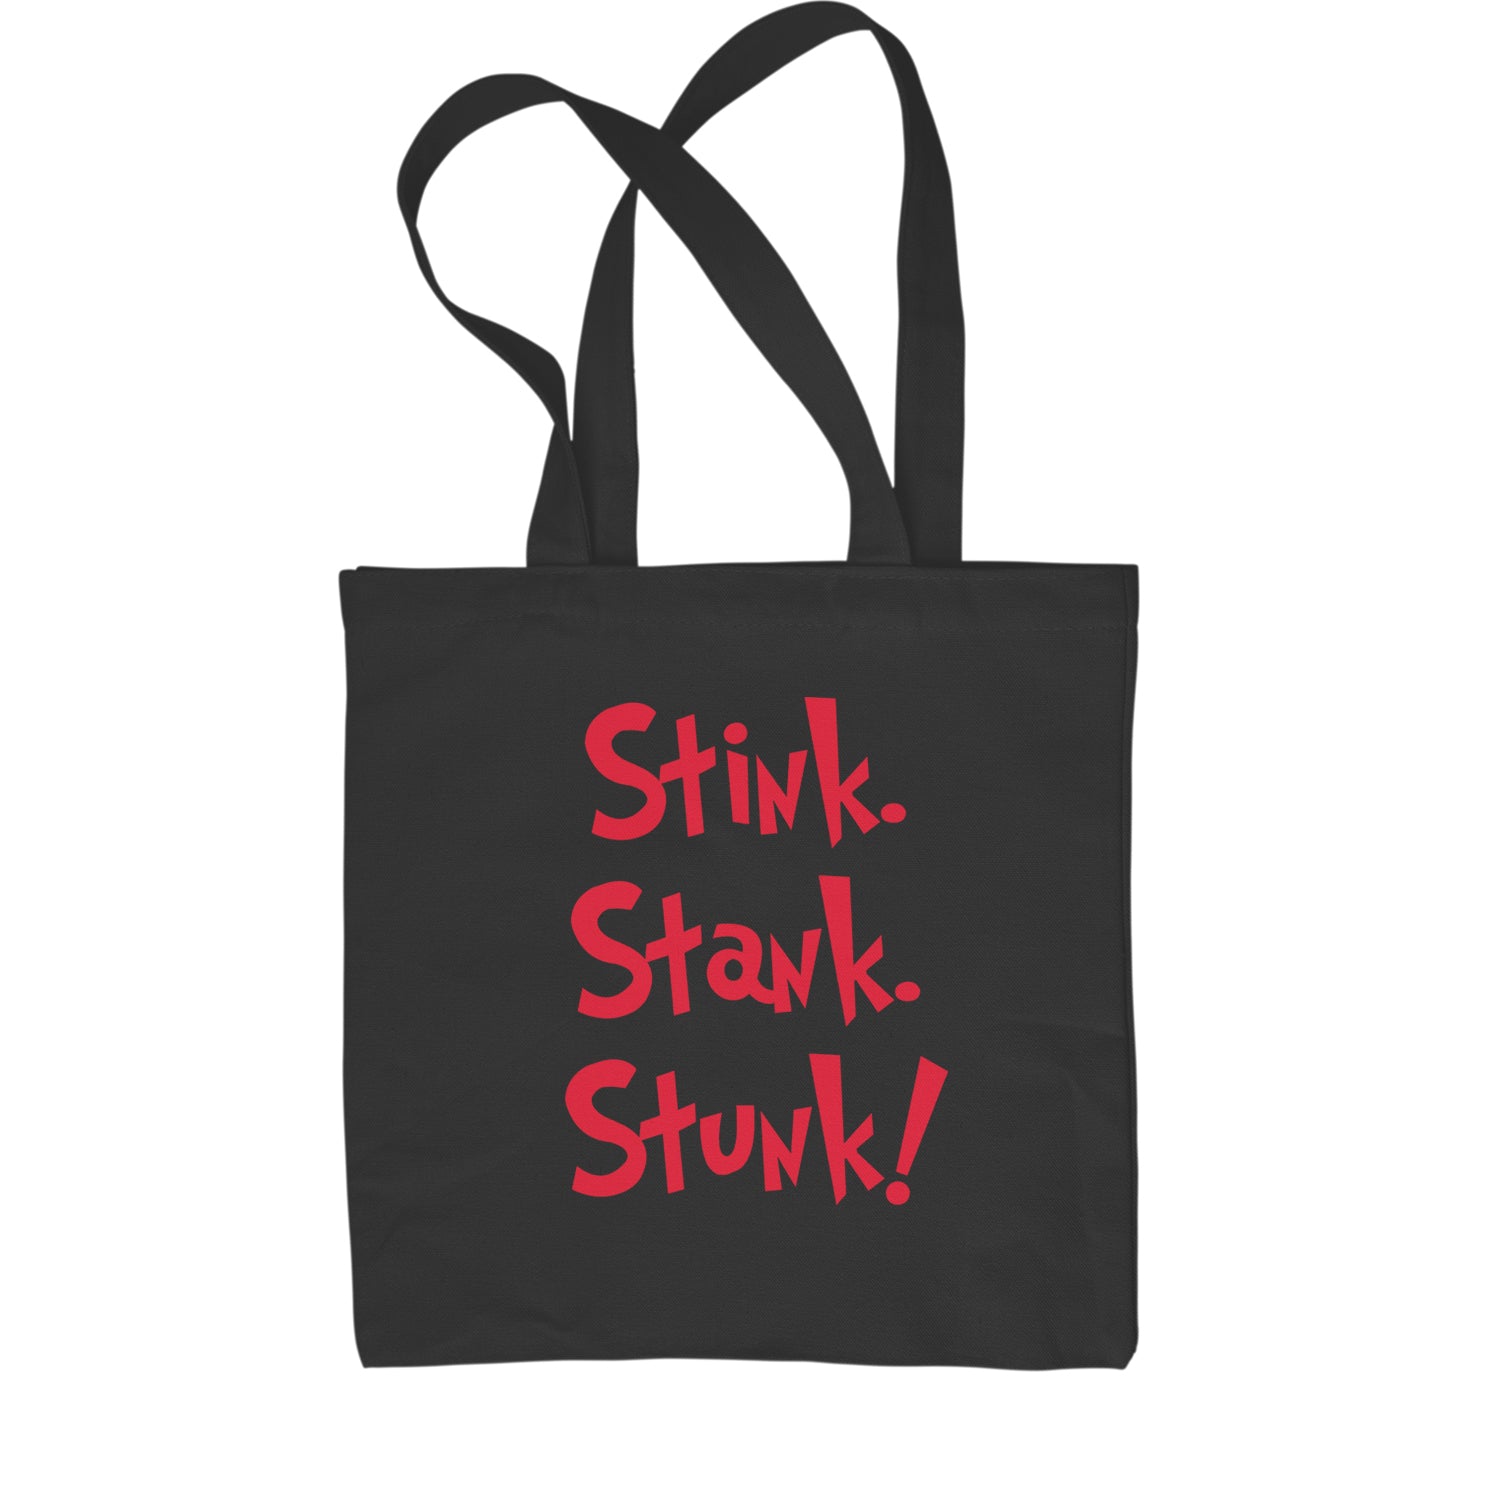 Stink Stank Stunk Grinch Shopping Tote Bag christmas, holiday, sweater, ugly, xmas by Expression Tees